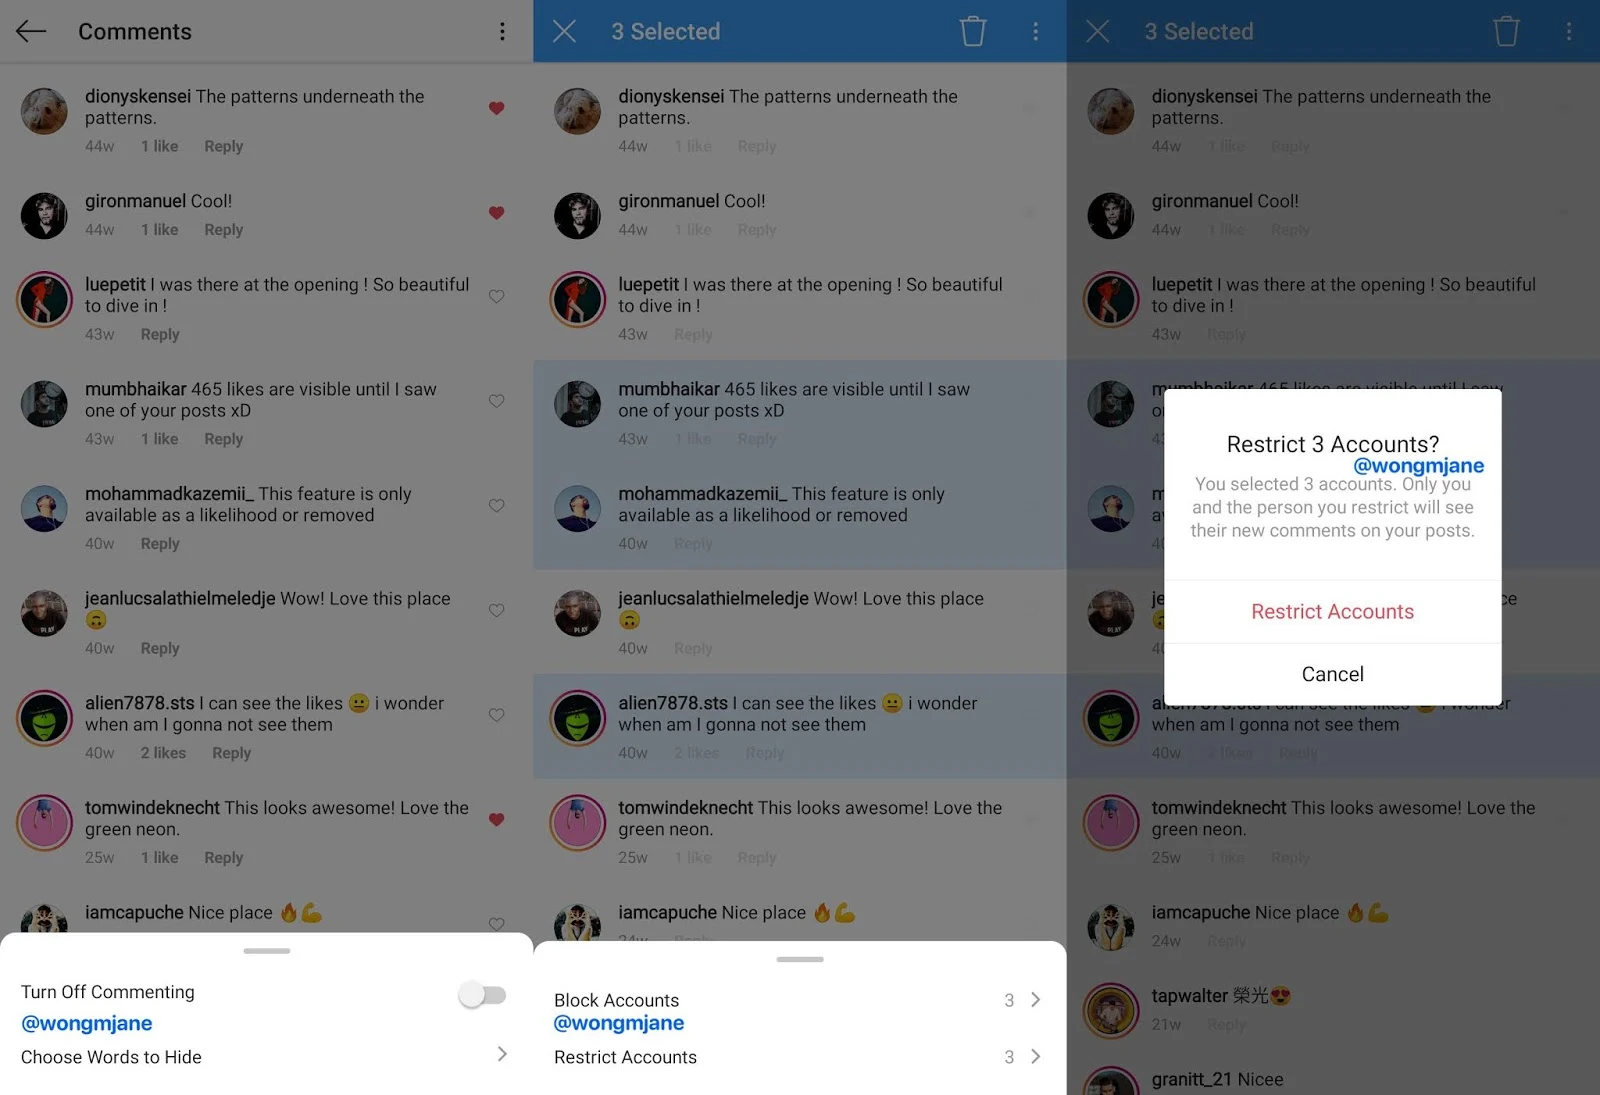 Instagram is working on letting you block/restrict multiple accounts from your comment sections in a new tool to help mitigating comment abuses